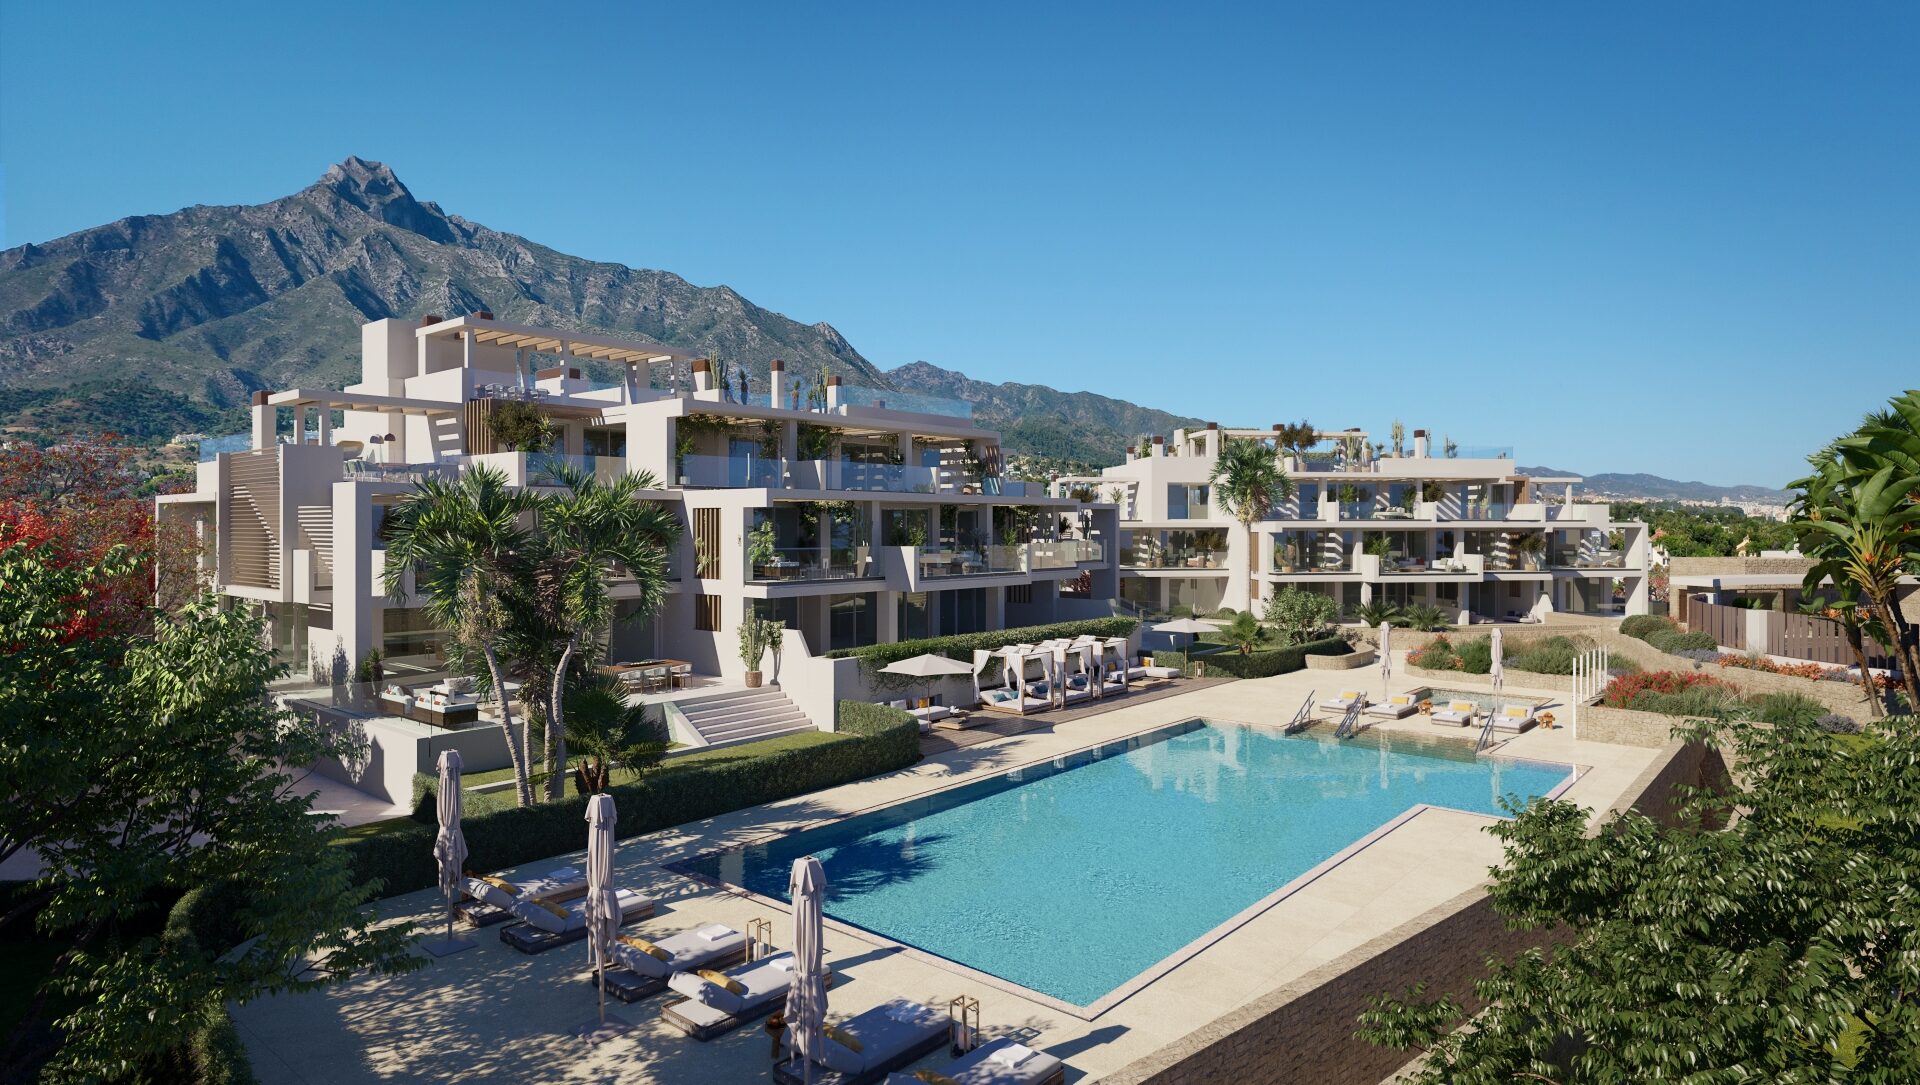 NEW! Luxury living with elegance on marbella’s golden mile